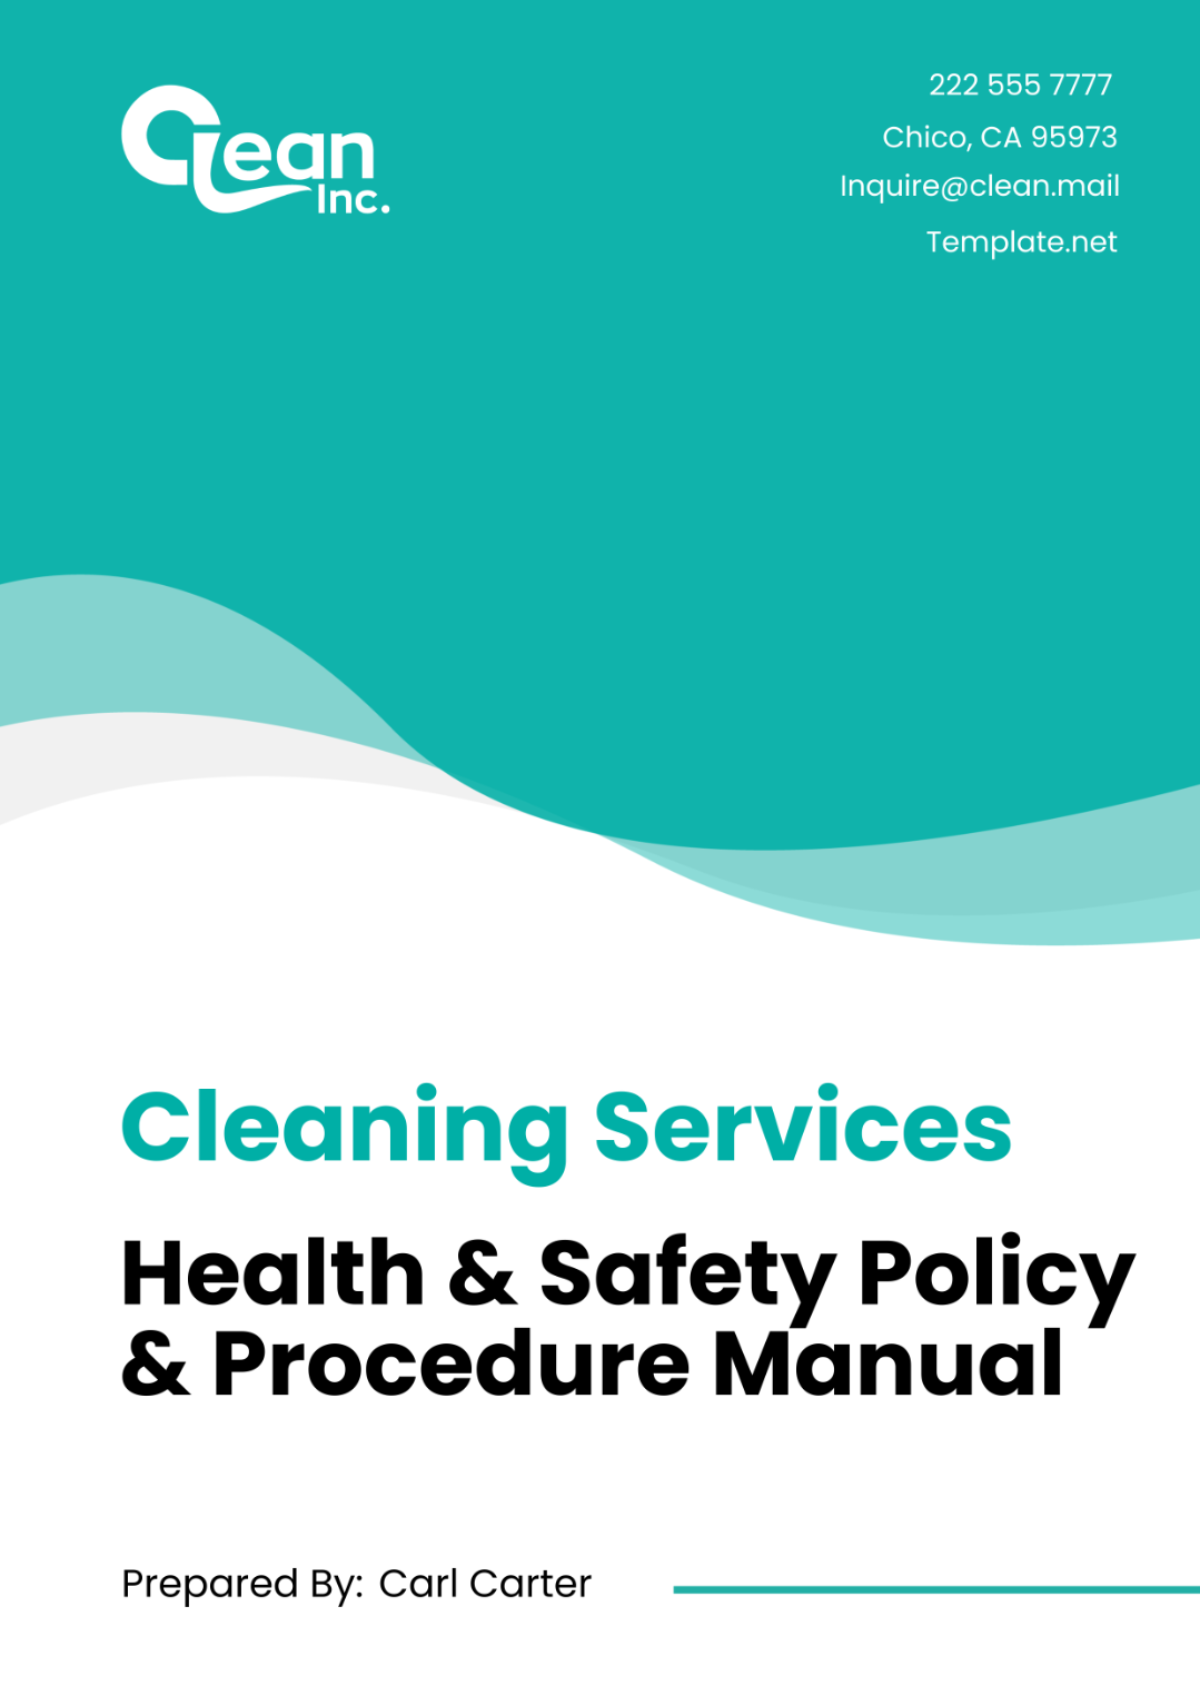 Cleaning Services Health & Safety Policy & Procedure Manual Template